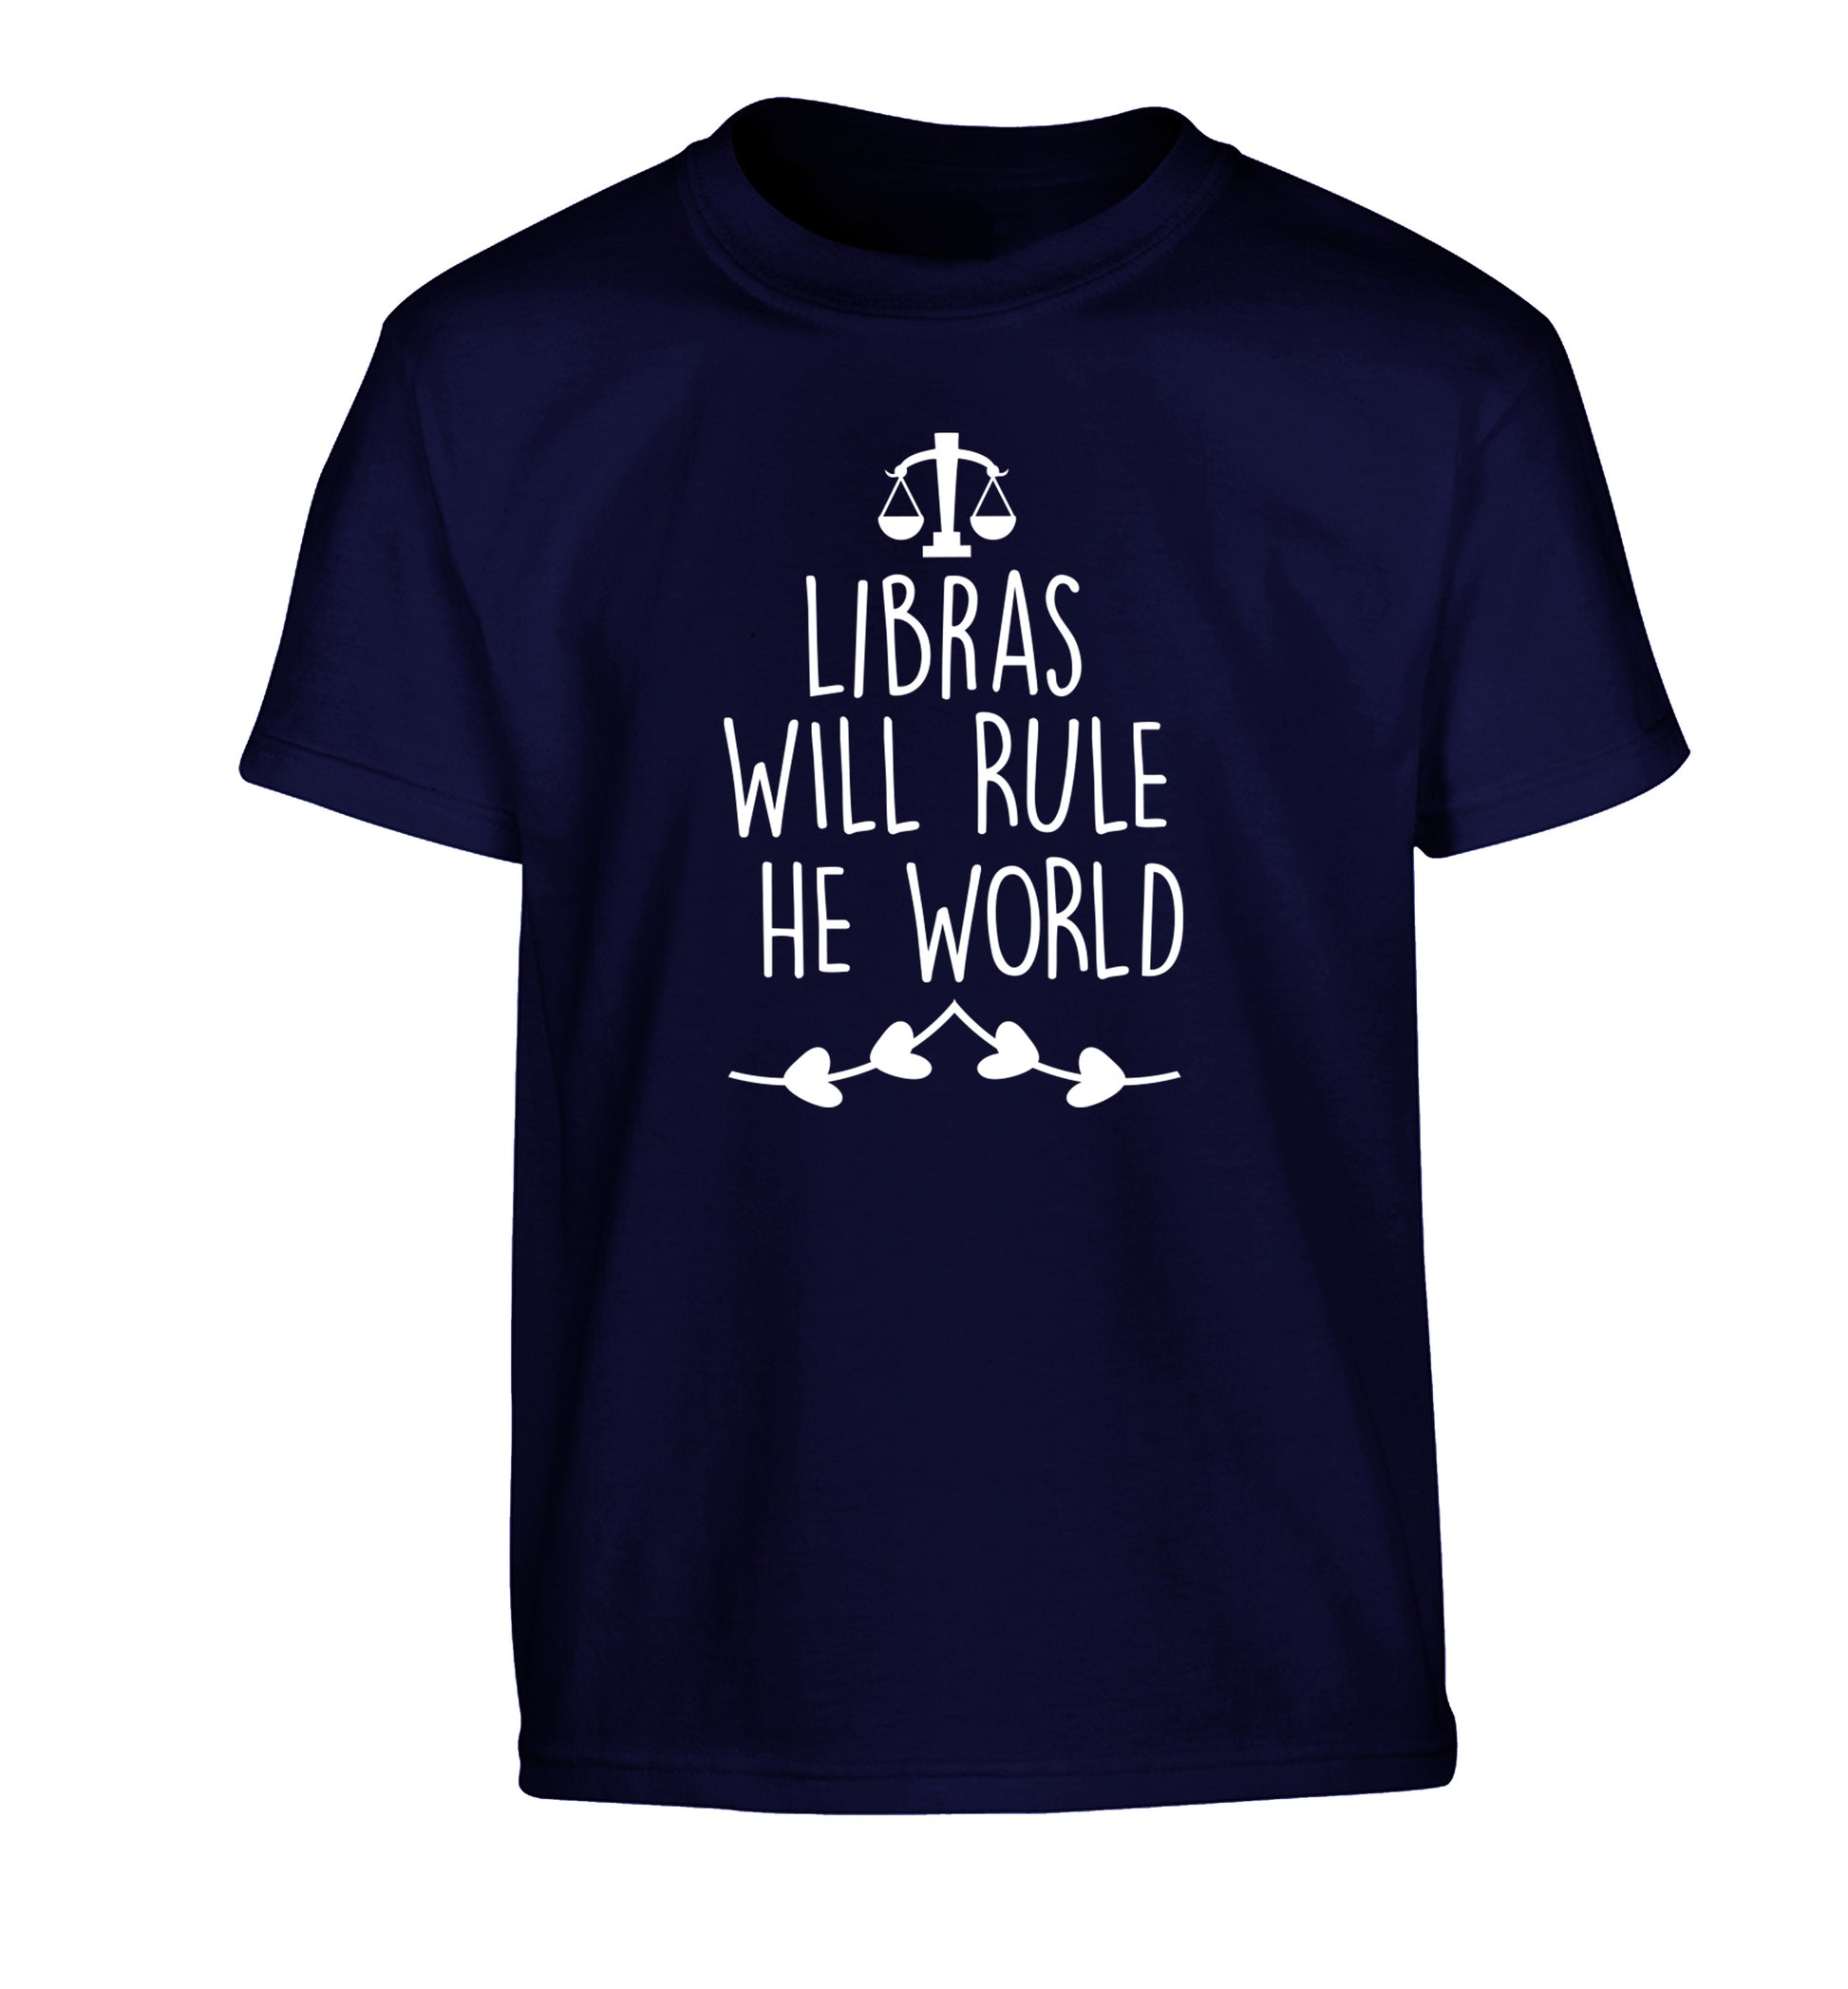 Libras will rule the world Children's navy Tshirt 12-13 Years